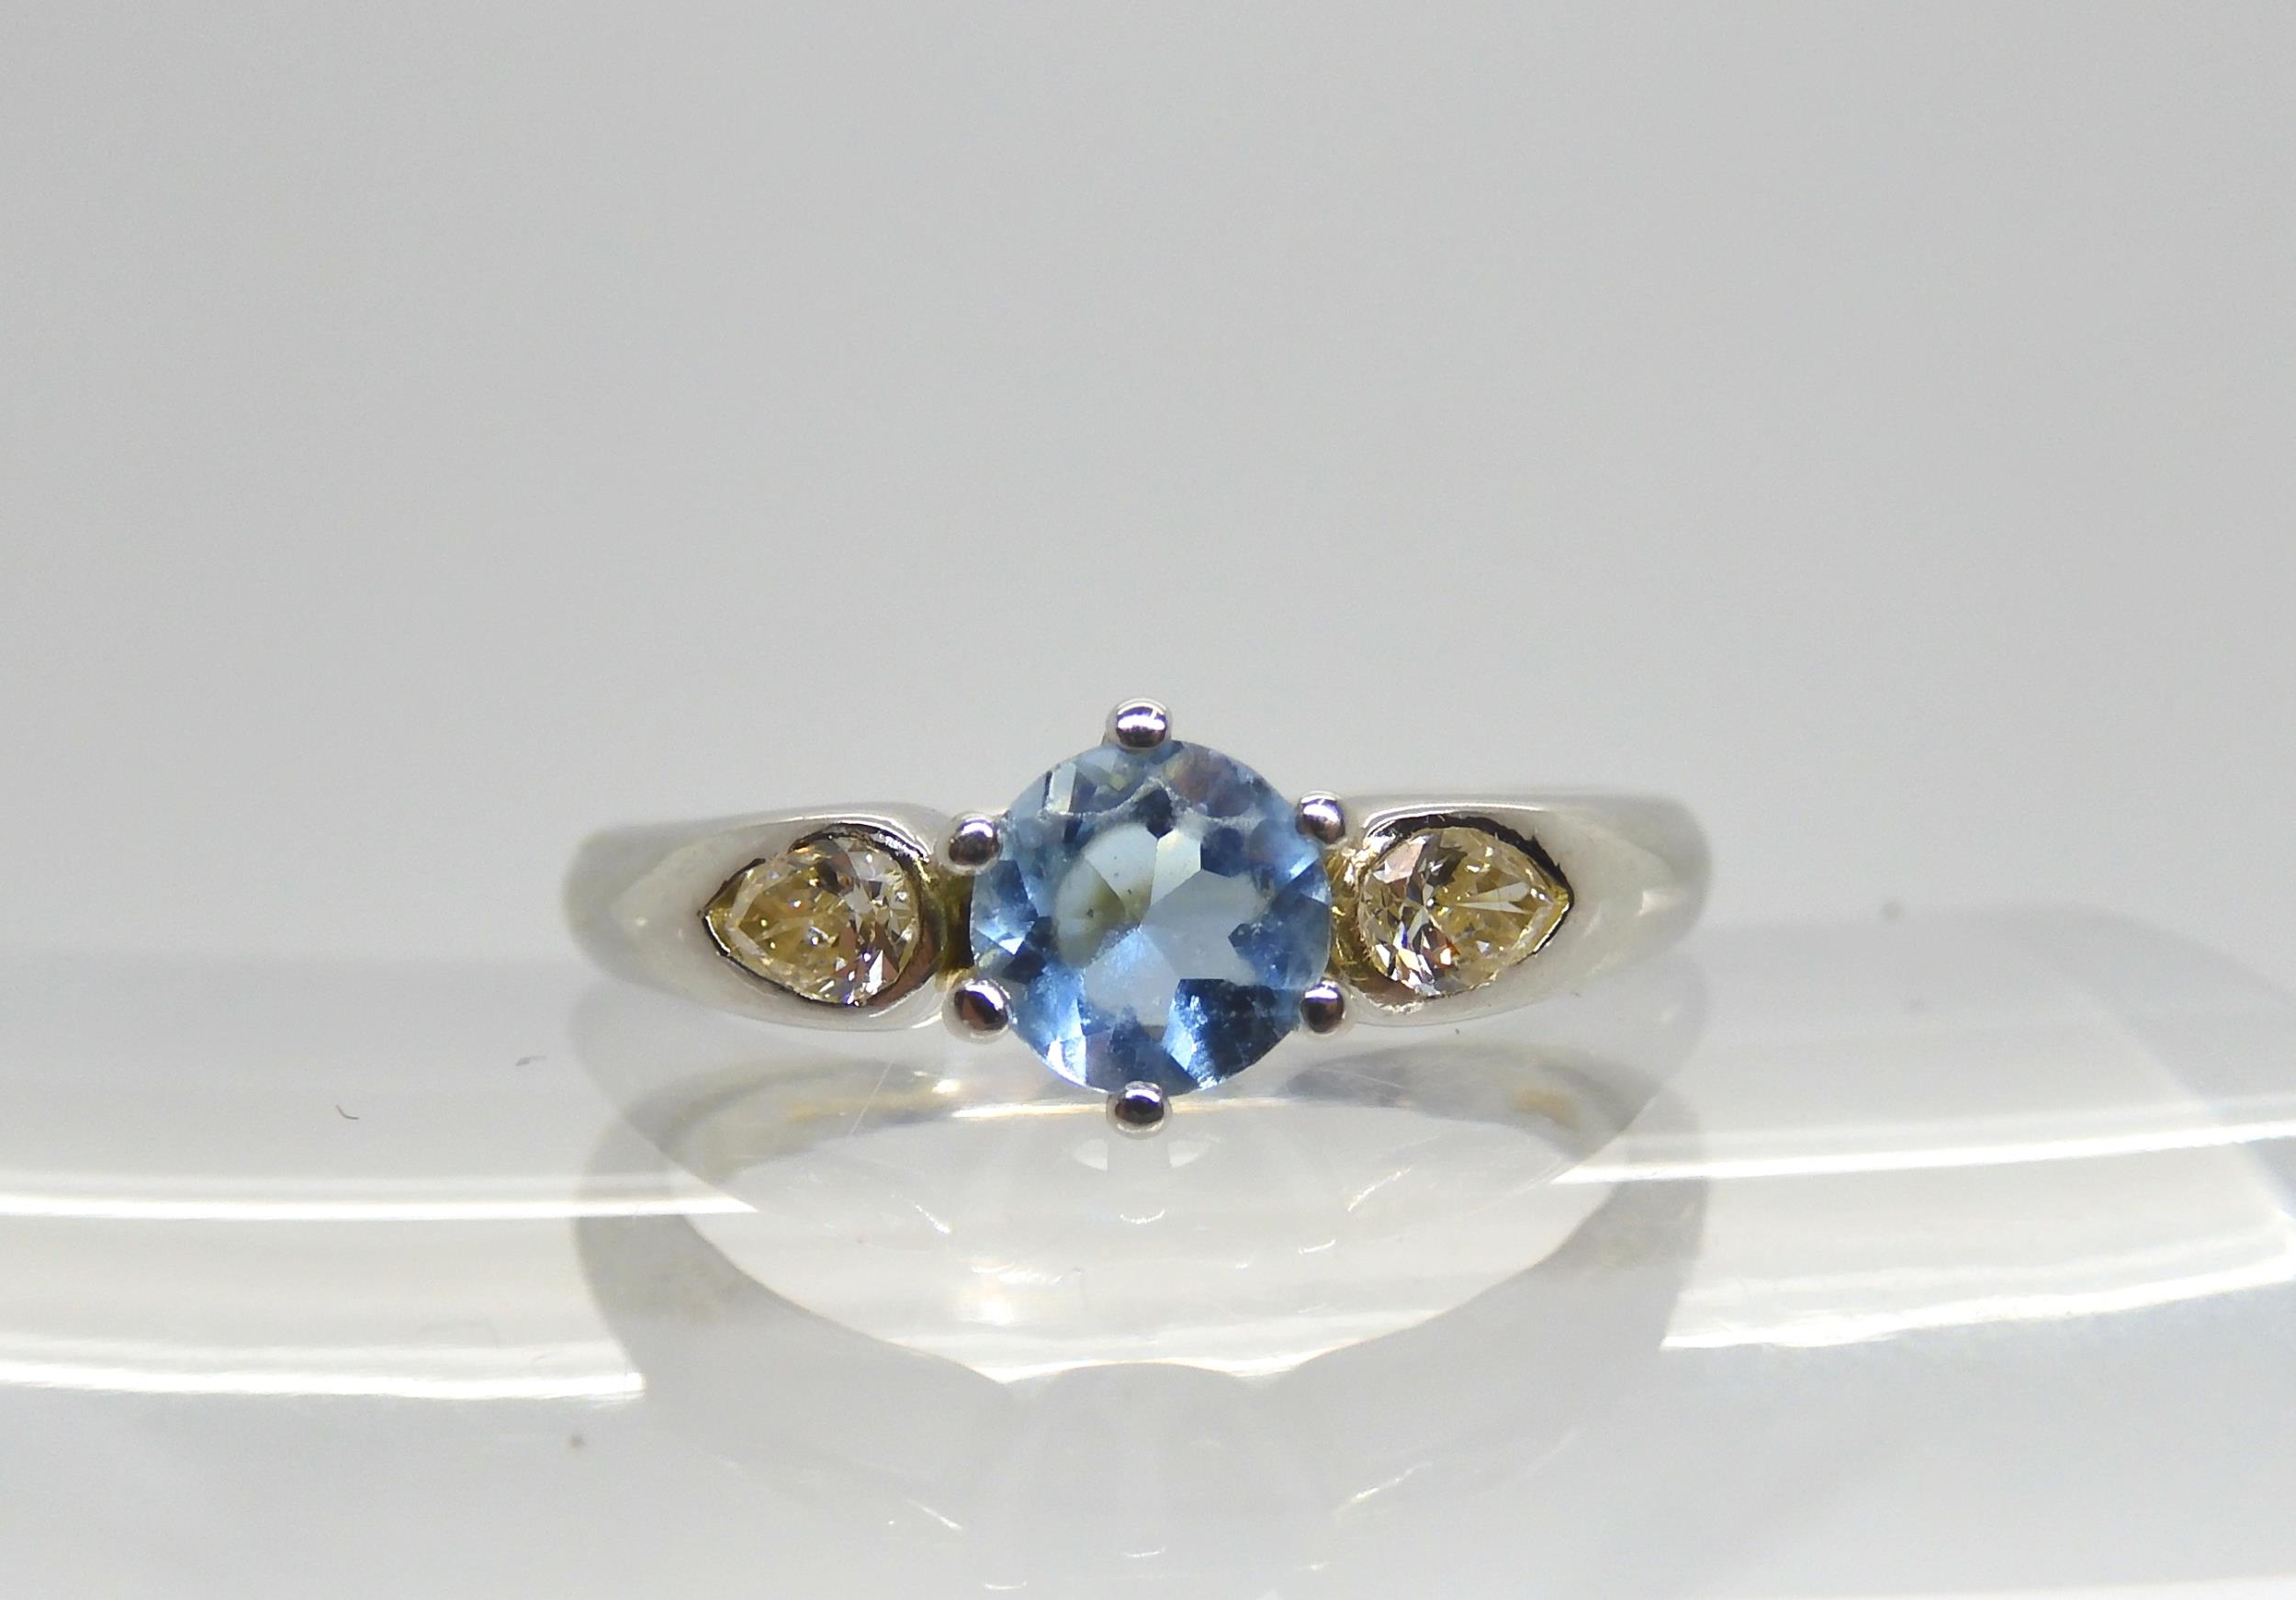 An 18ct white gold diamond and aquamarine ring, made by Boodles  set with estimated approx 0.10cts